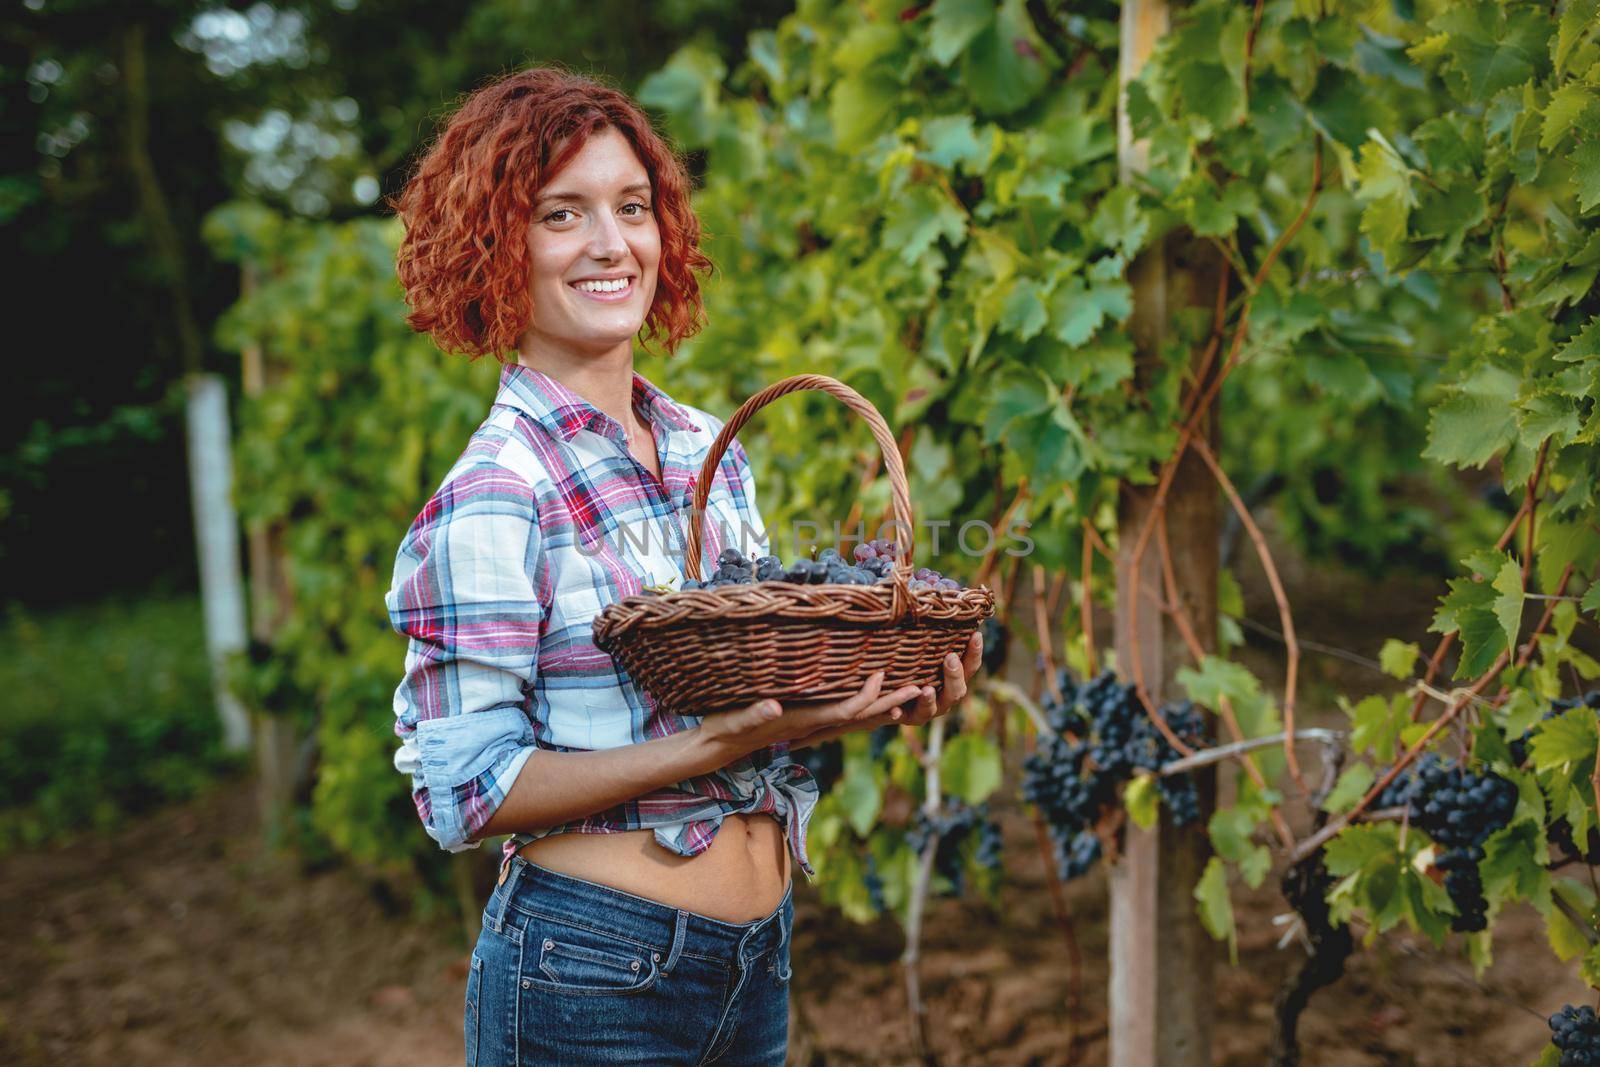 Beautiful smiling female winemaker at a vineyard. She is holding basket with grapes and looking at camera.